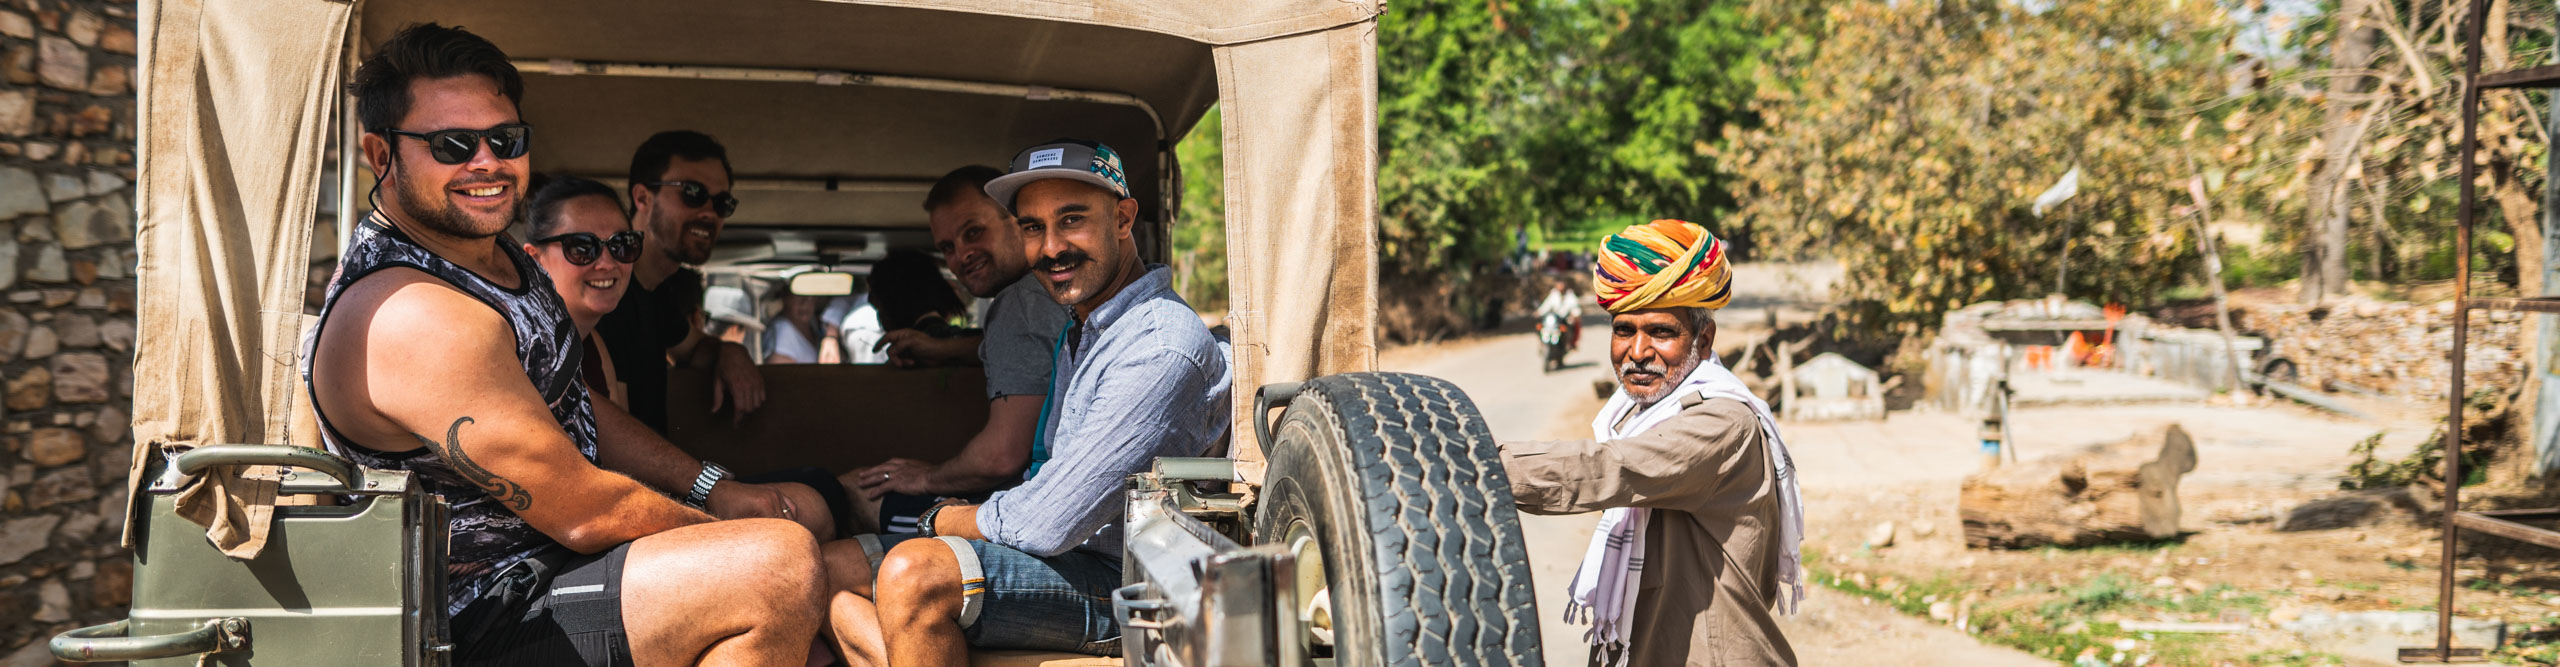 Group sitting in truck in the sunshine in Bijaipur, India 